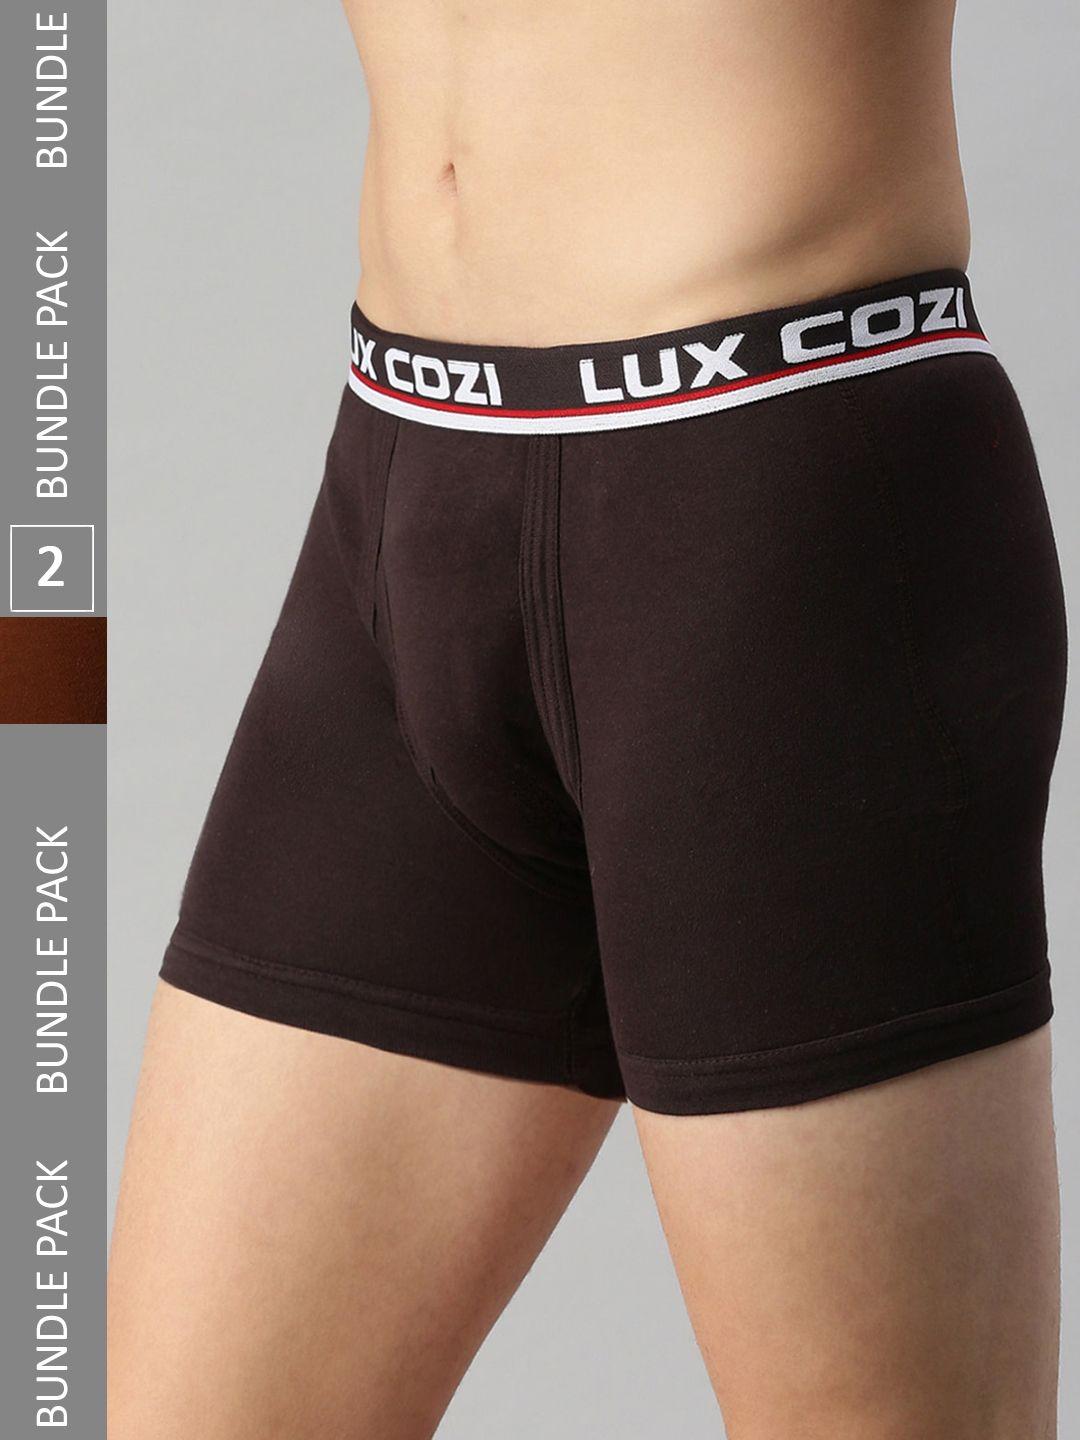 lux cozi men pack of 2 breathable outer elastic trunks